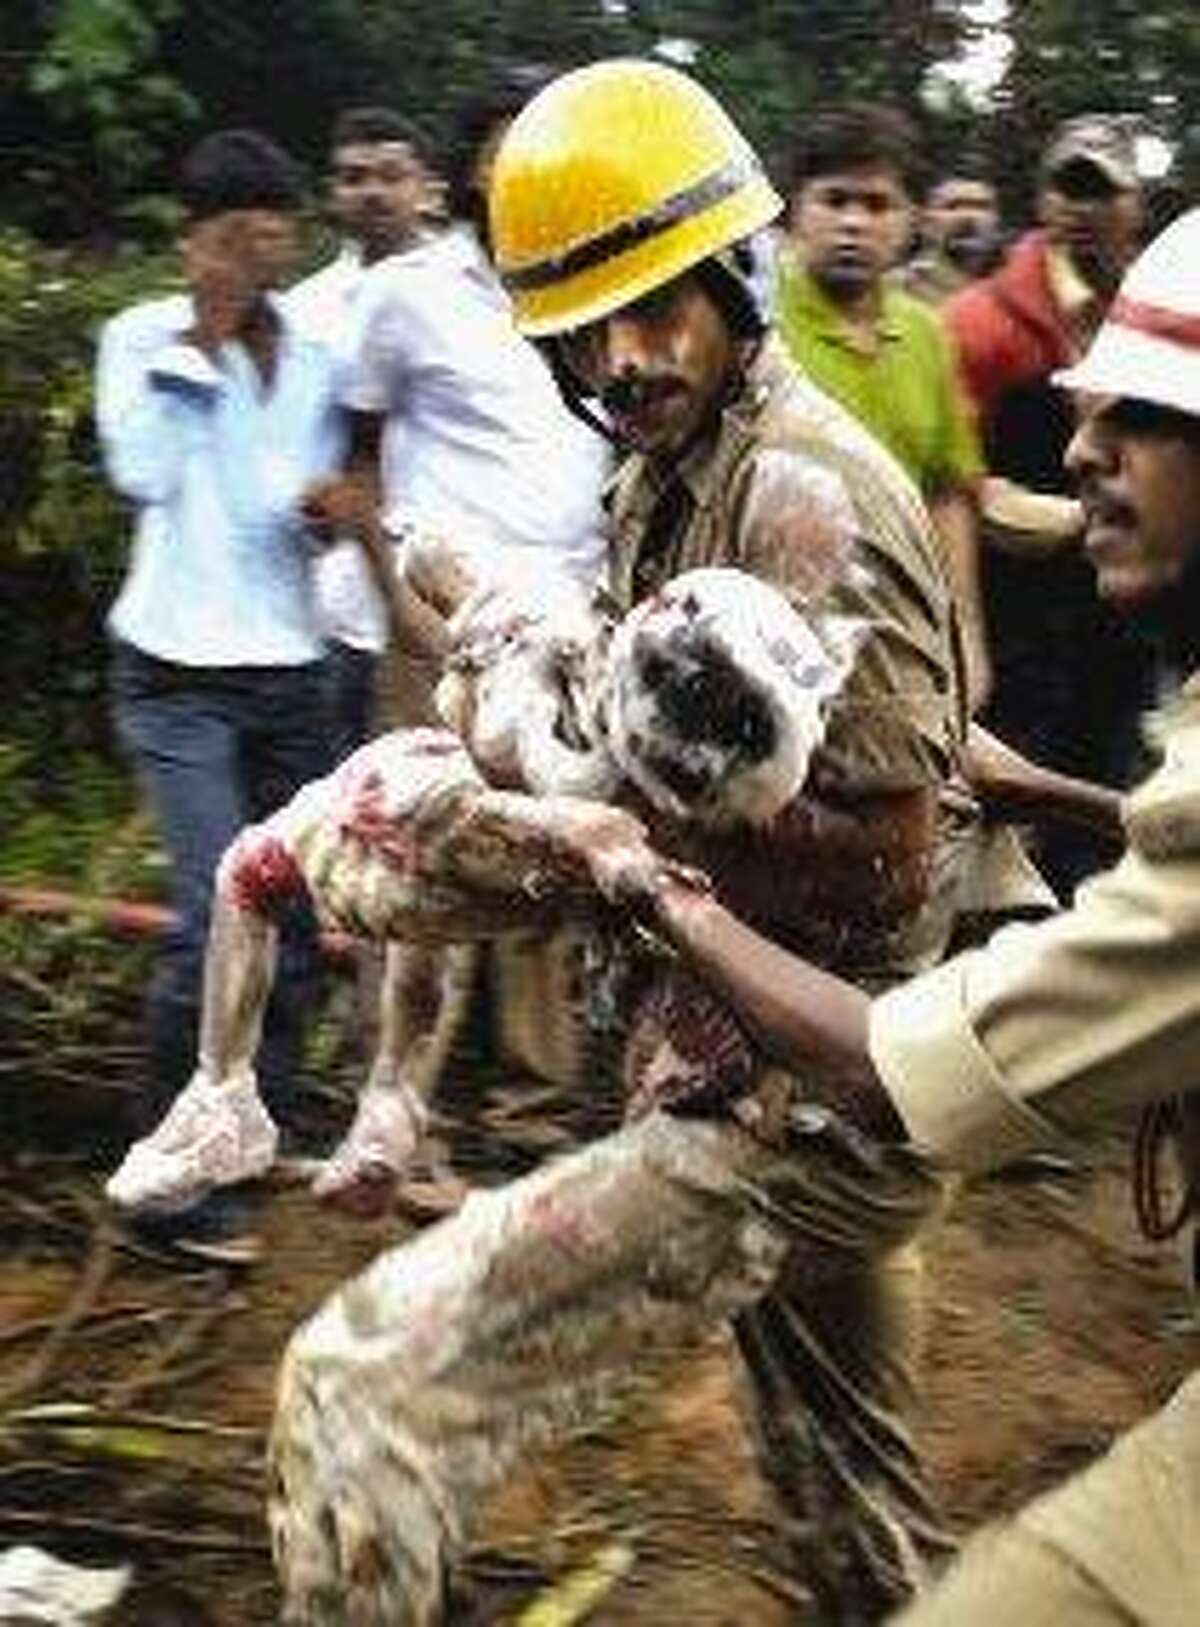 Indian firefighters carry a child, reportedly a survivor, out of the debris of an Air India plane that crashed in Mangalore, in the southern Indian state of Karnataka. The plane arriving from Dubai crashed Saturday morning after it overshot a runway while trying to land in southern India, and officials feared as many as 160 people on board were killed.